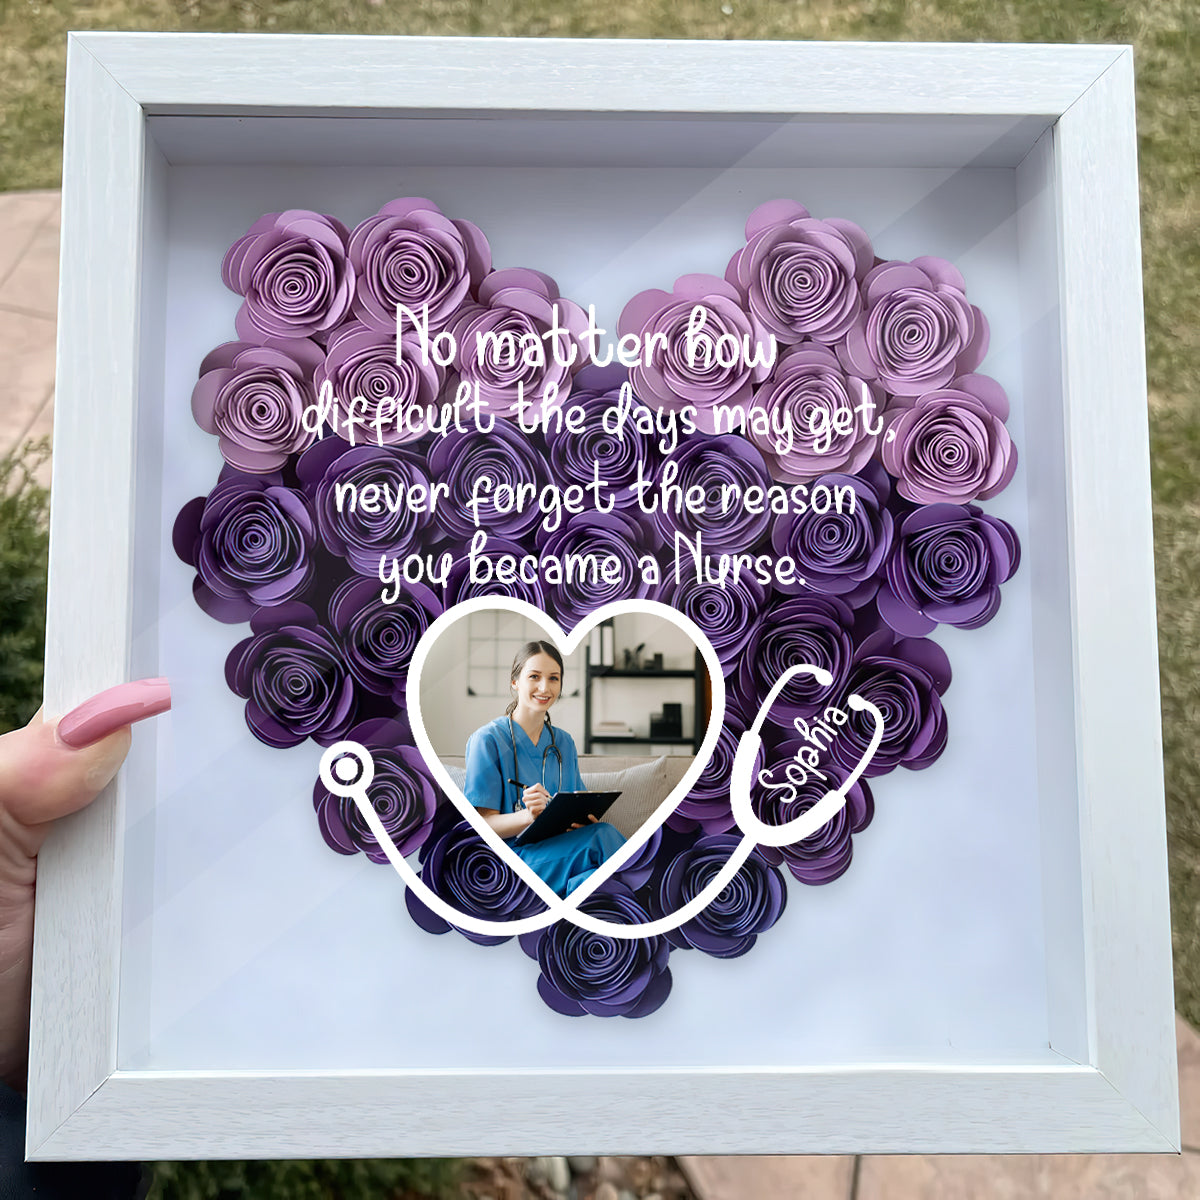 Discover No Matter How Difficulty - Personalized Nurse Gift Flower Frame Box